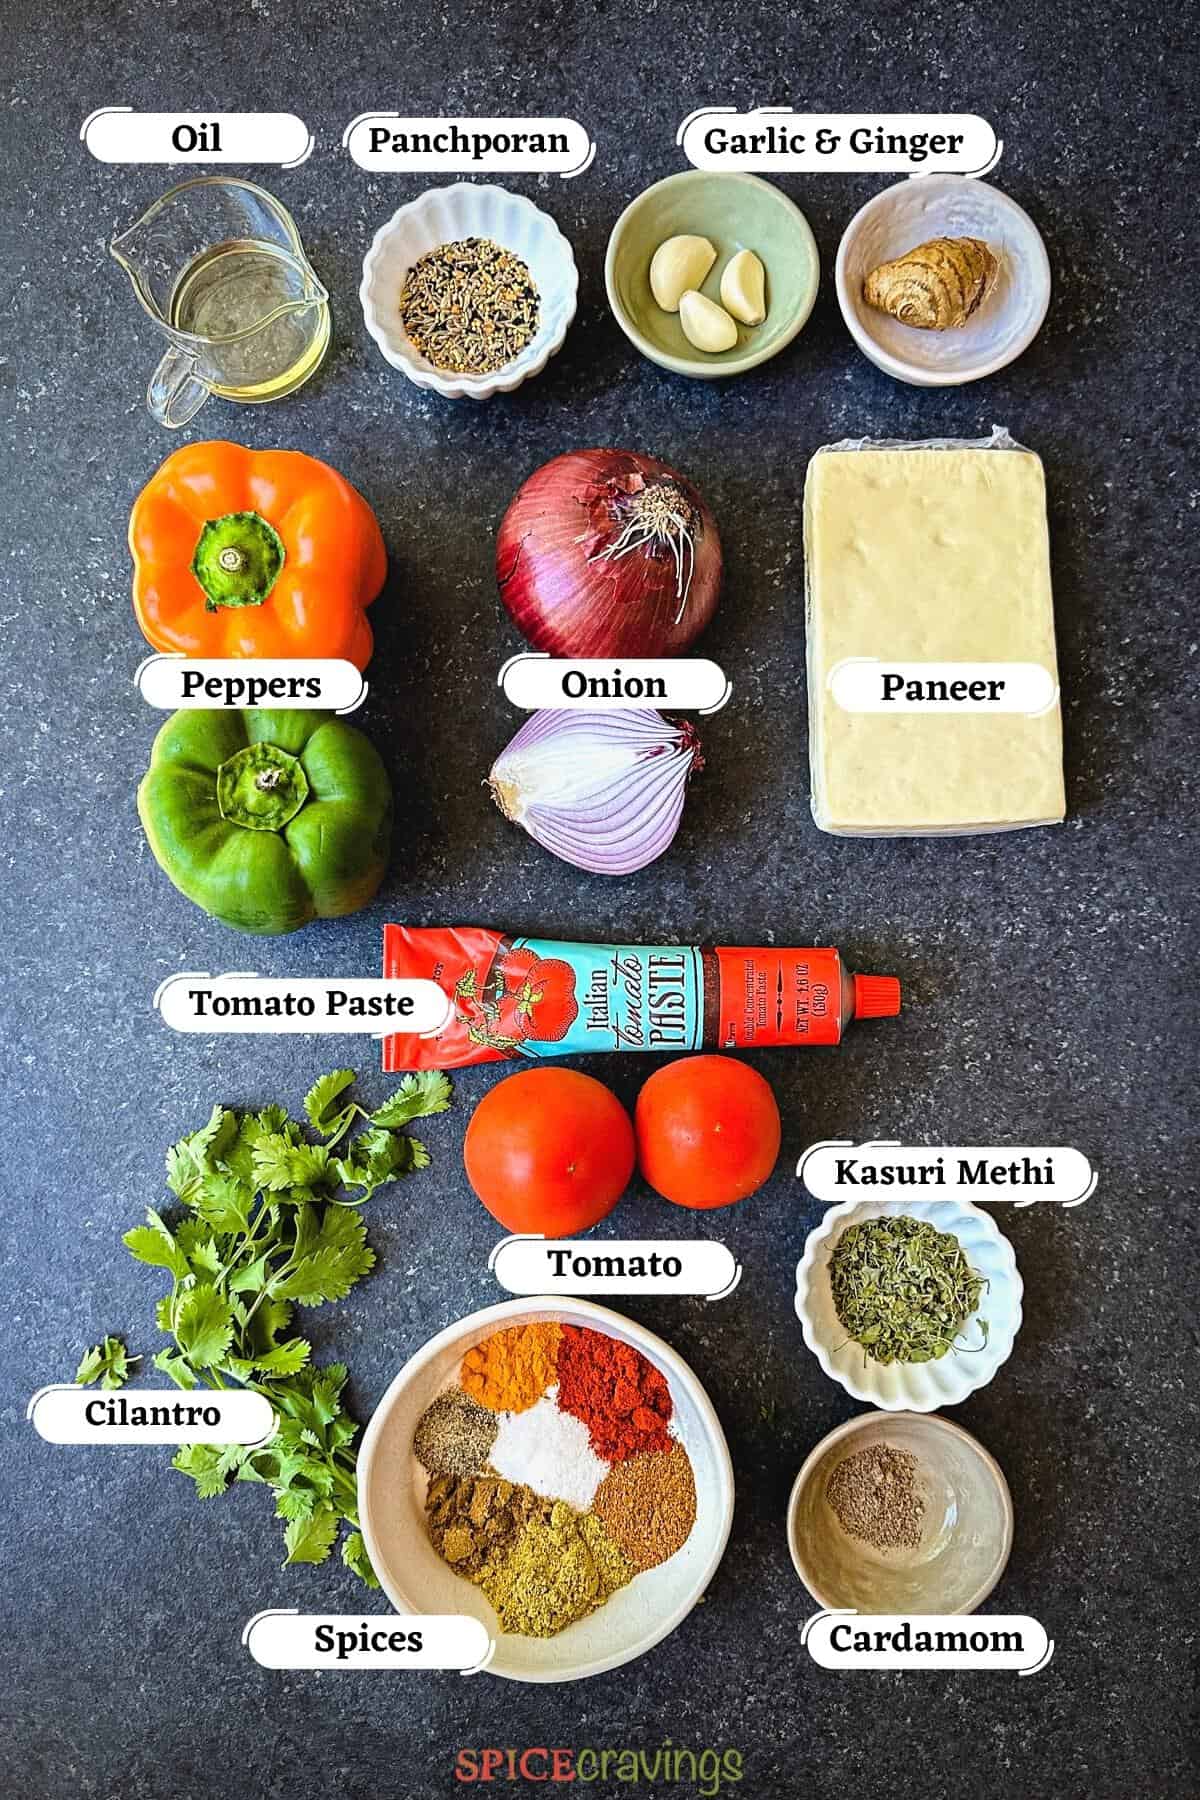 Paneer, peppers and spices among other ingredients on grey board